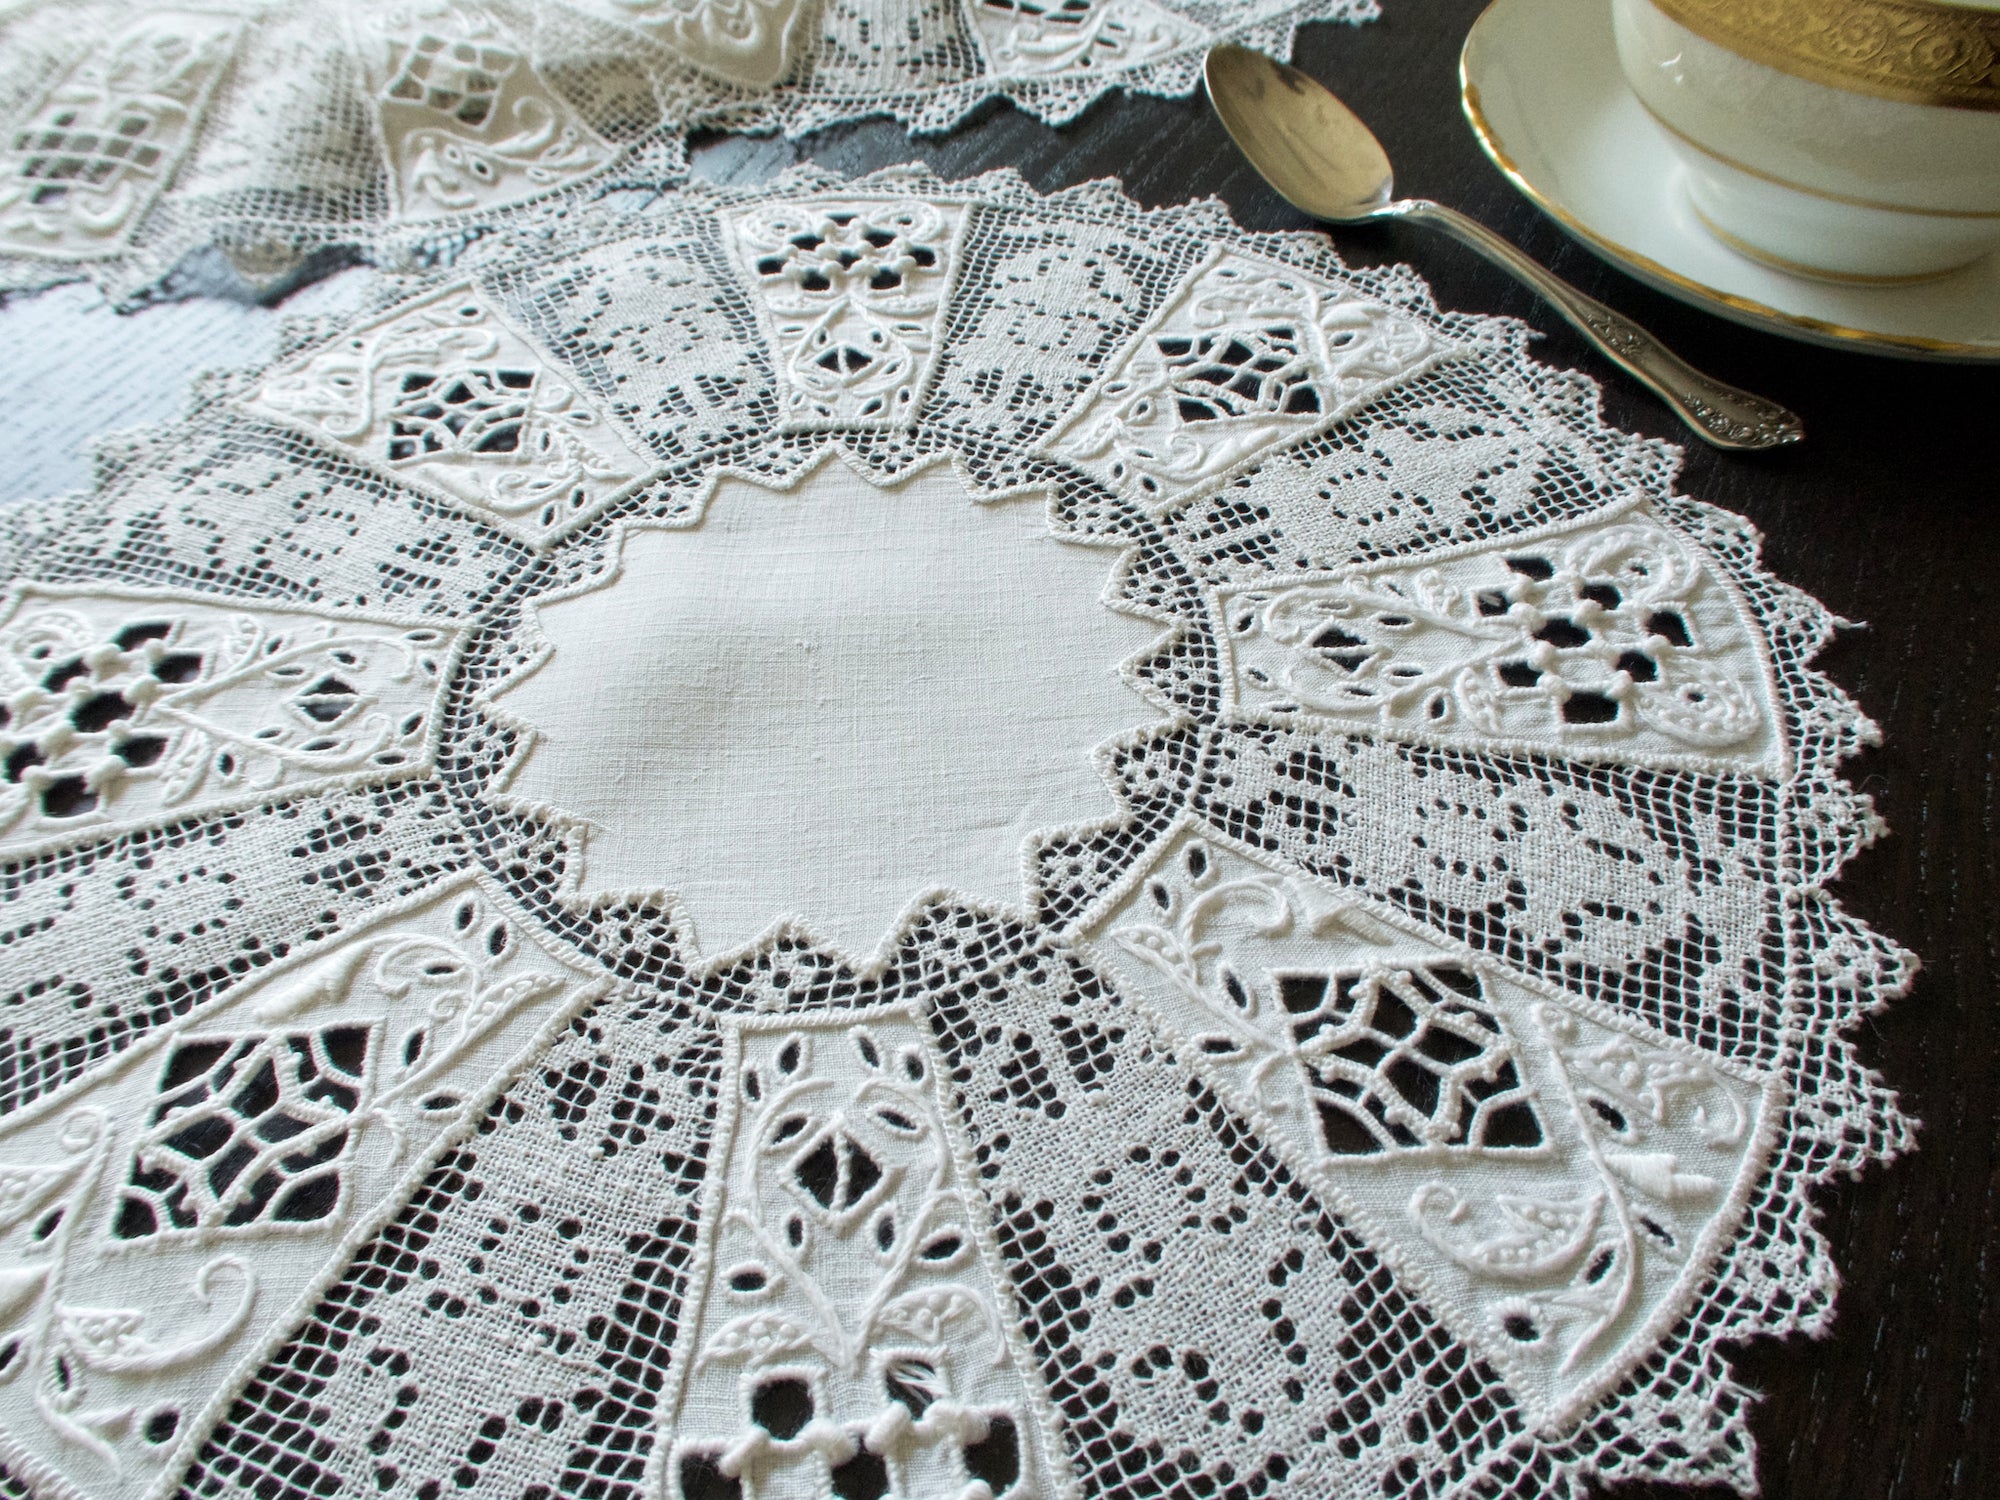 Antique Ornate Mixed Lace & Linen 10.5" Round Placemats Set of 12